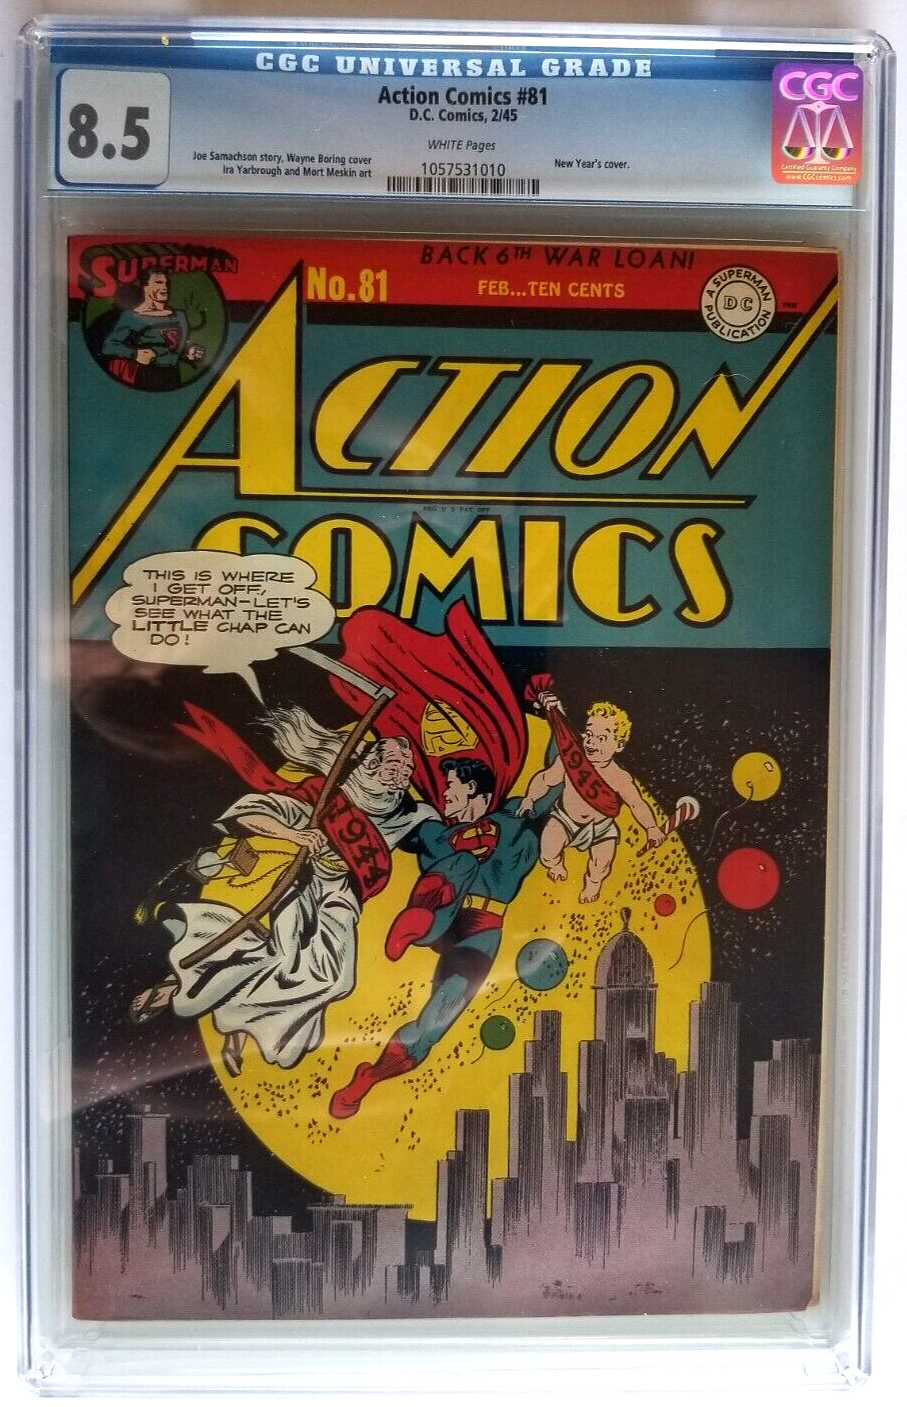 ACTION COMICS 81 CGC VF 85 DC 1945 4TH HIGHEST GRADE NEW YEARS COVER WHITE P